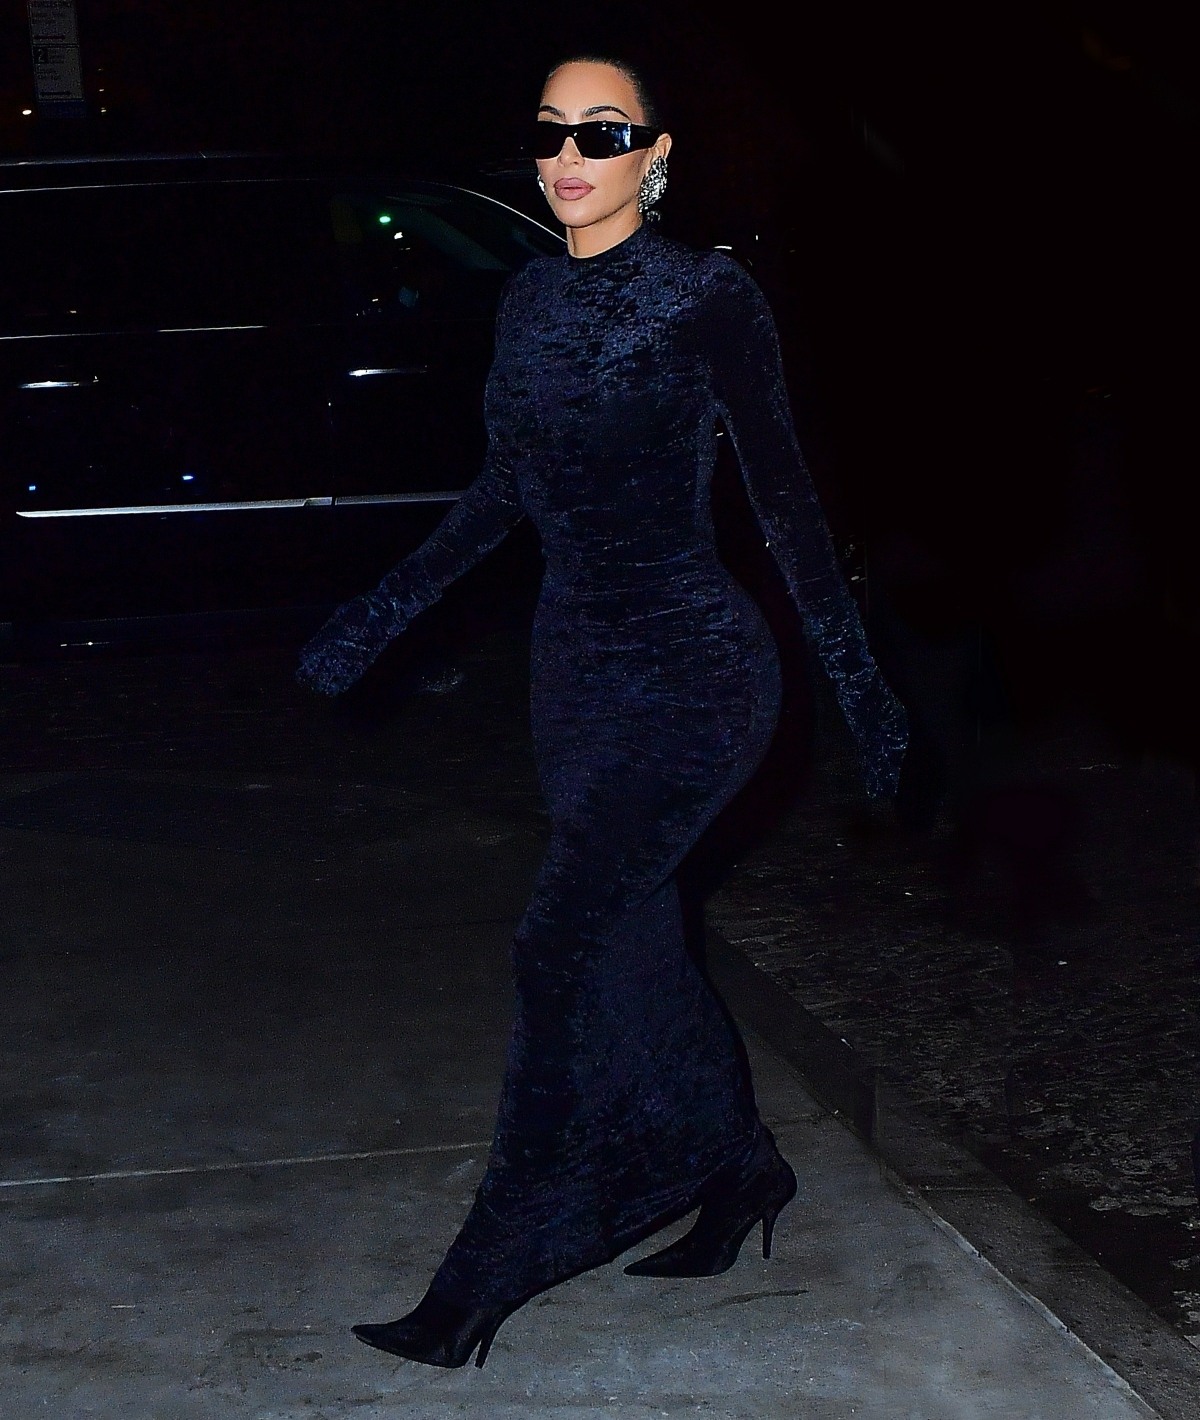 Kim Kardashian steps out in curve-hugging velvet dress as she heads out for dinner at Zero Bond in NYC